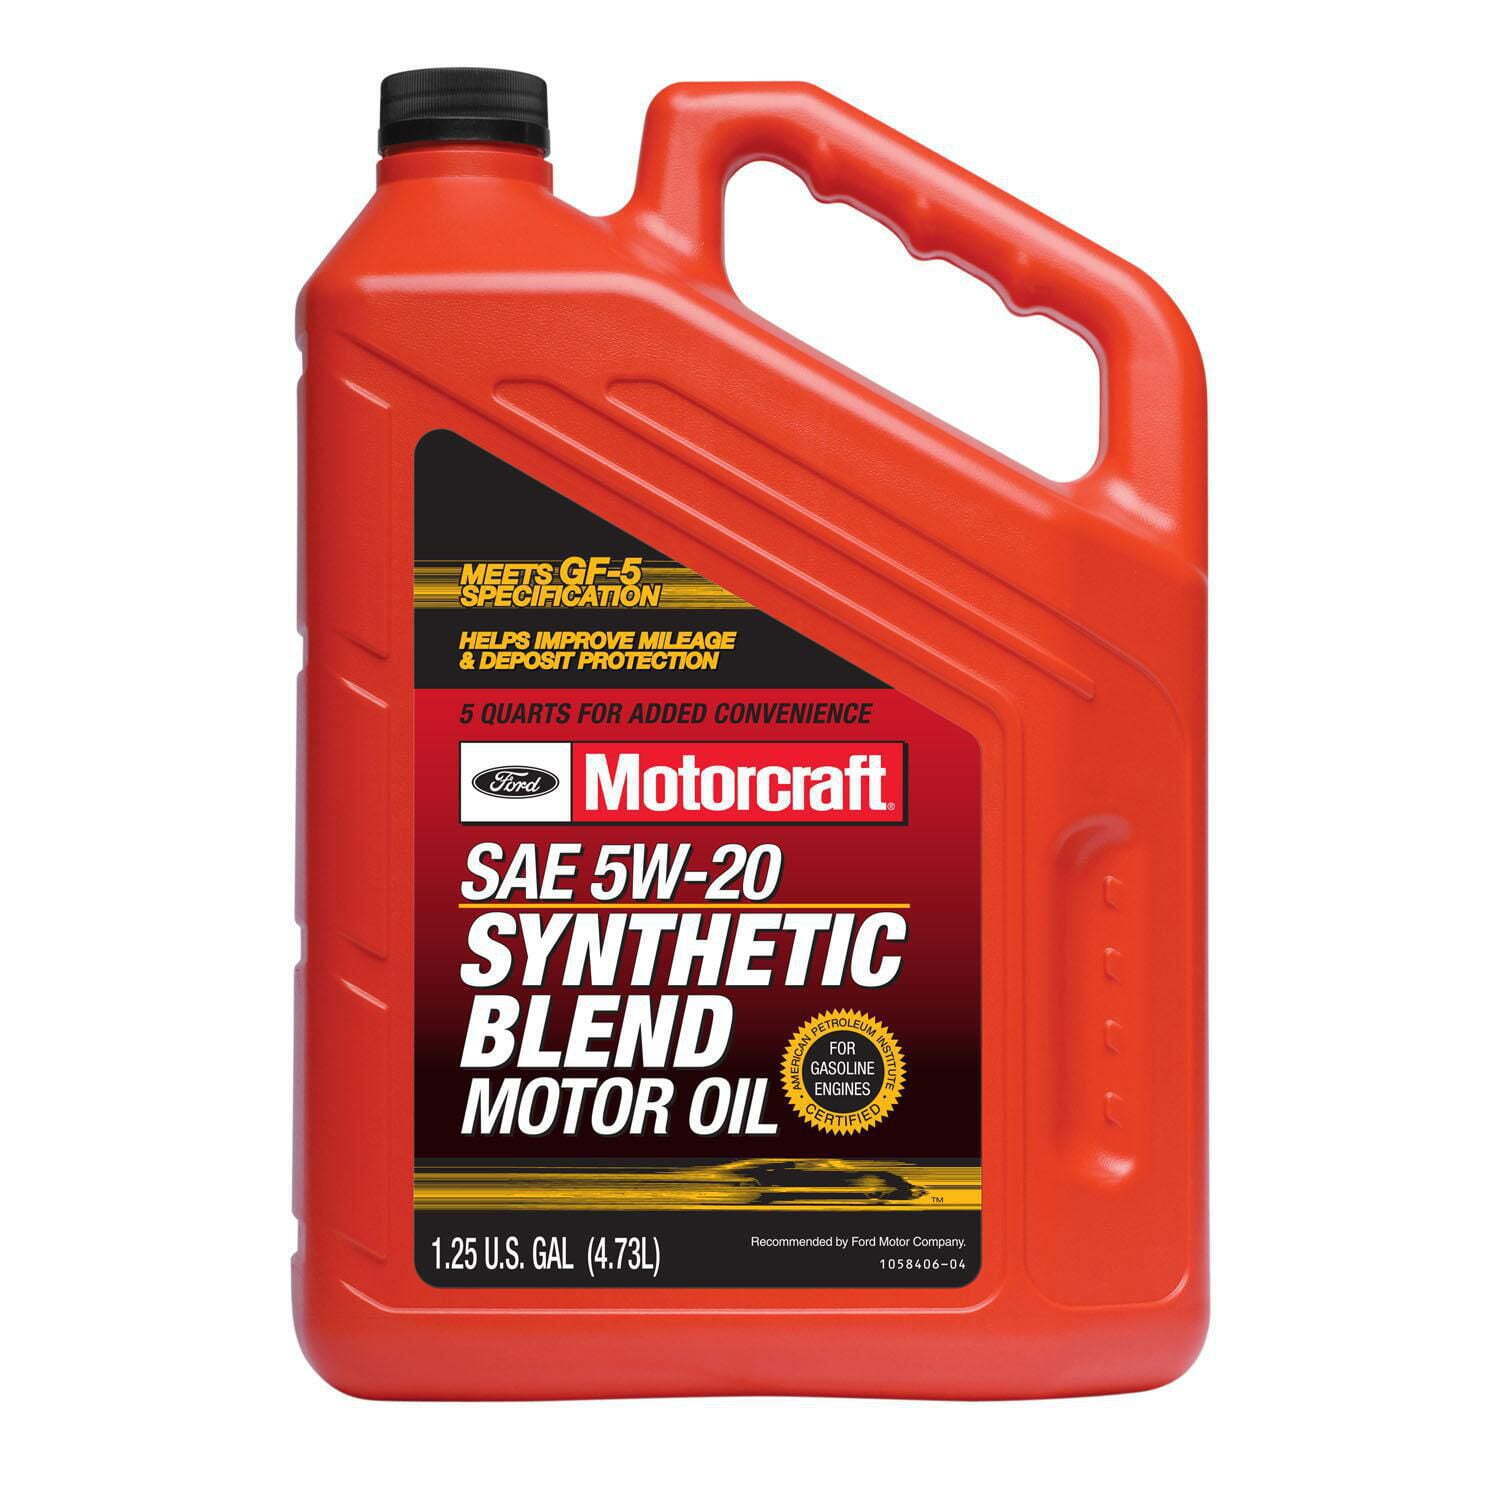 Synthetic Blend Motor Oil，5W-20-premium-quality motor oil specifically developed